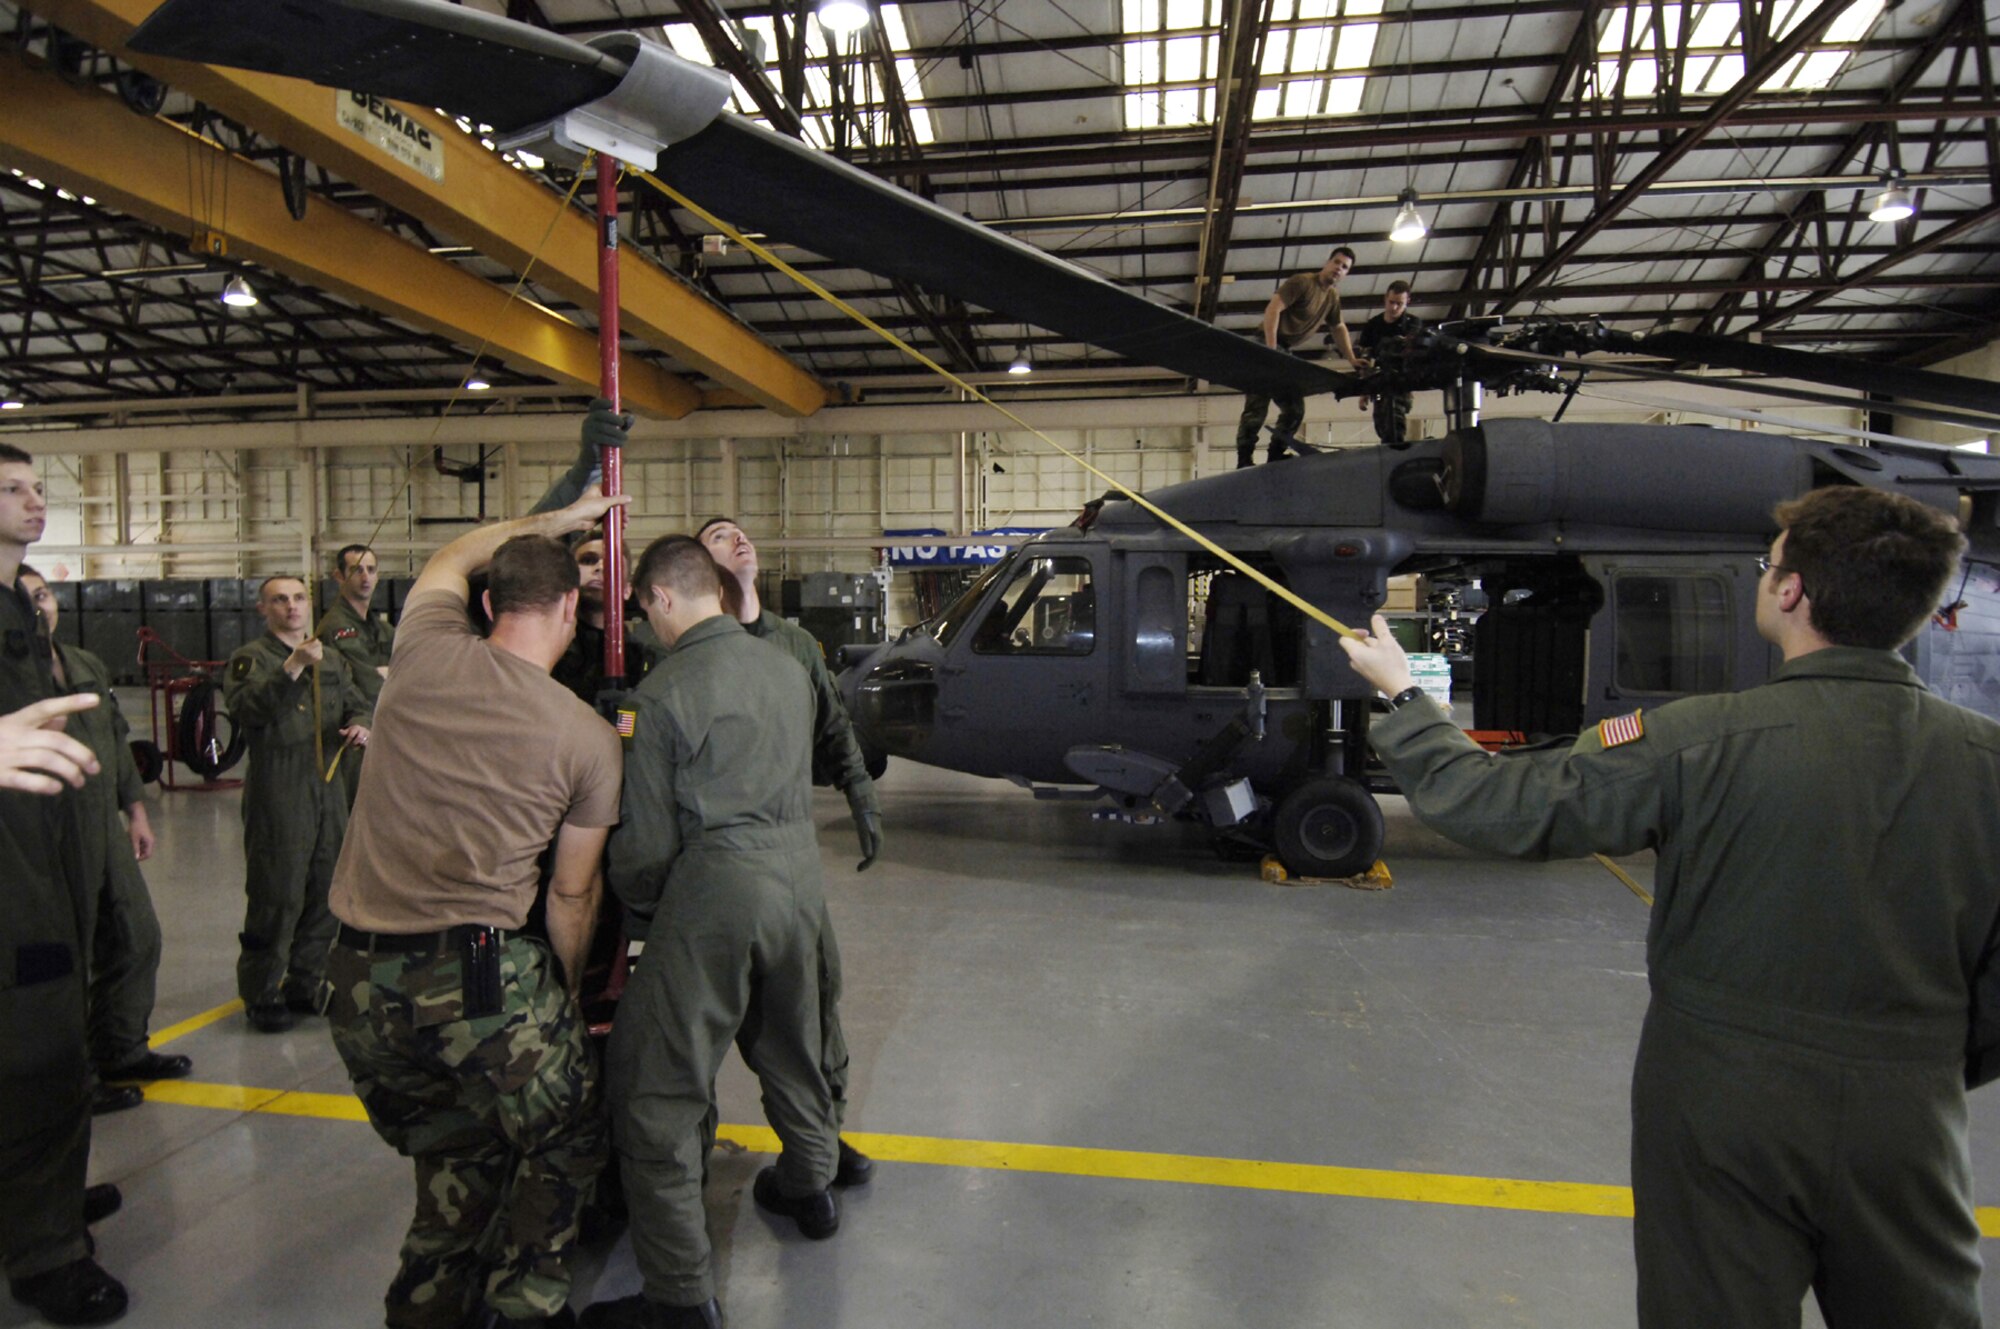 MOODY AIR FORCE BASE, Ga. -- Aircrew members from the 41st Rescue Squadron, here, learn specific operations for unfolding the main rotor blades of an HH-60G Pave Hawk from members of the 347th Aircraft Maintenance Squadron. This team effort will allow the crews rapidly deploy the helicopters. (Photo by Staff Sgt. Manuel Martinez)